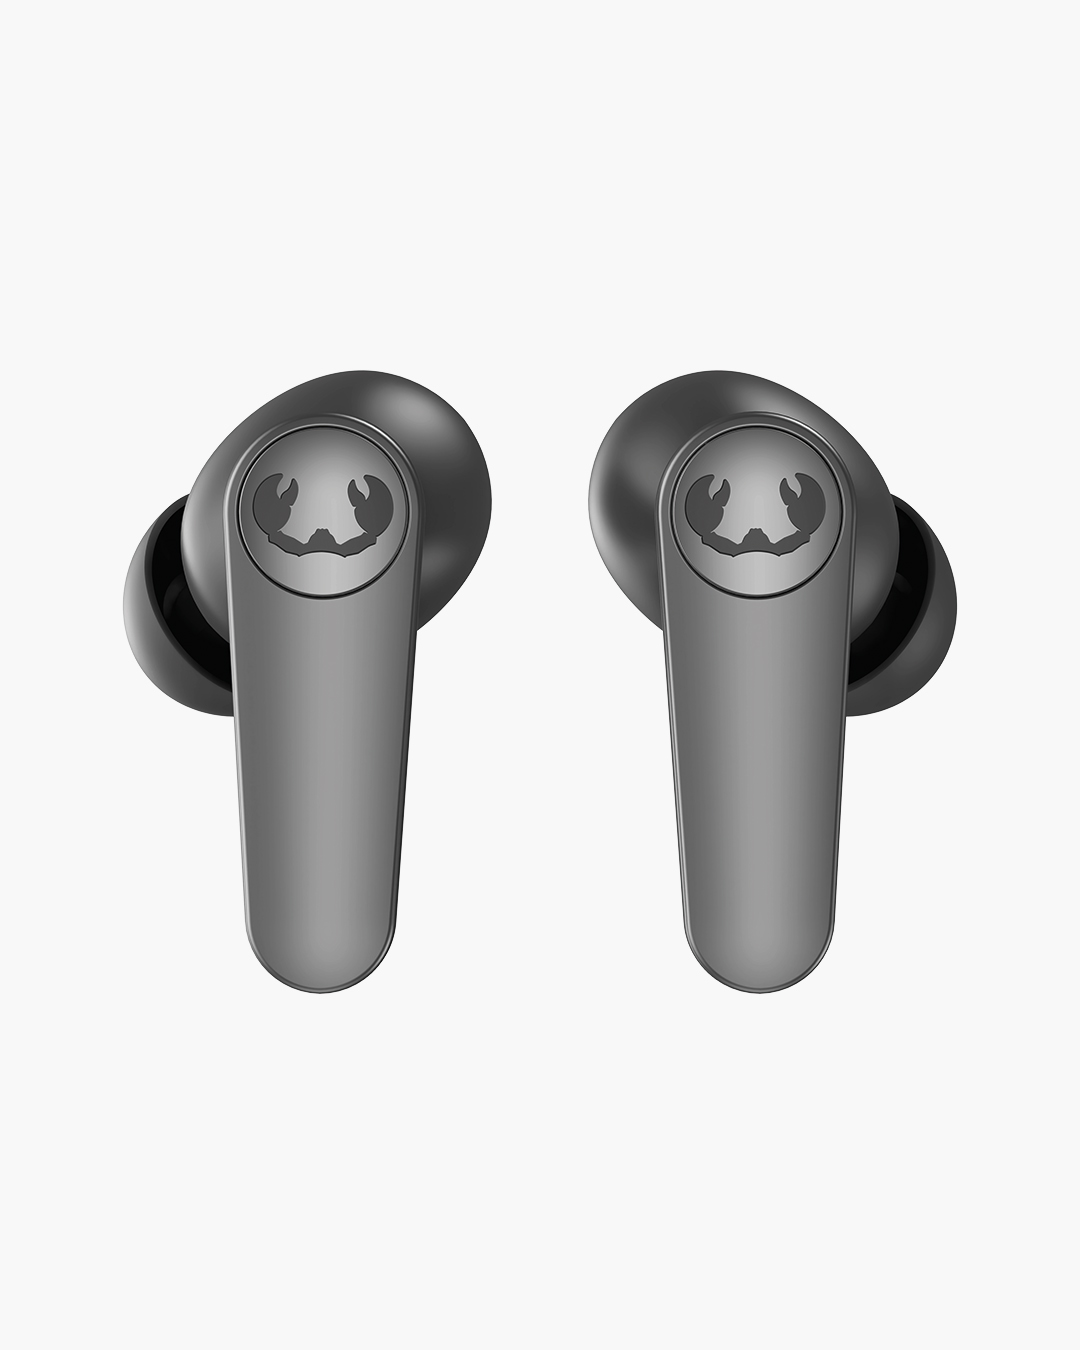 Fresh 'n Rebel - Twins ANC - True Wireless In-ear headphones with active noise cancelling - Storm Grey